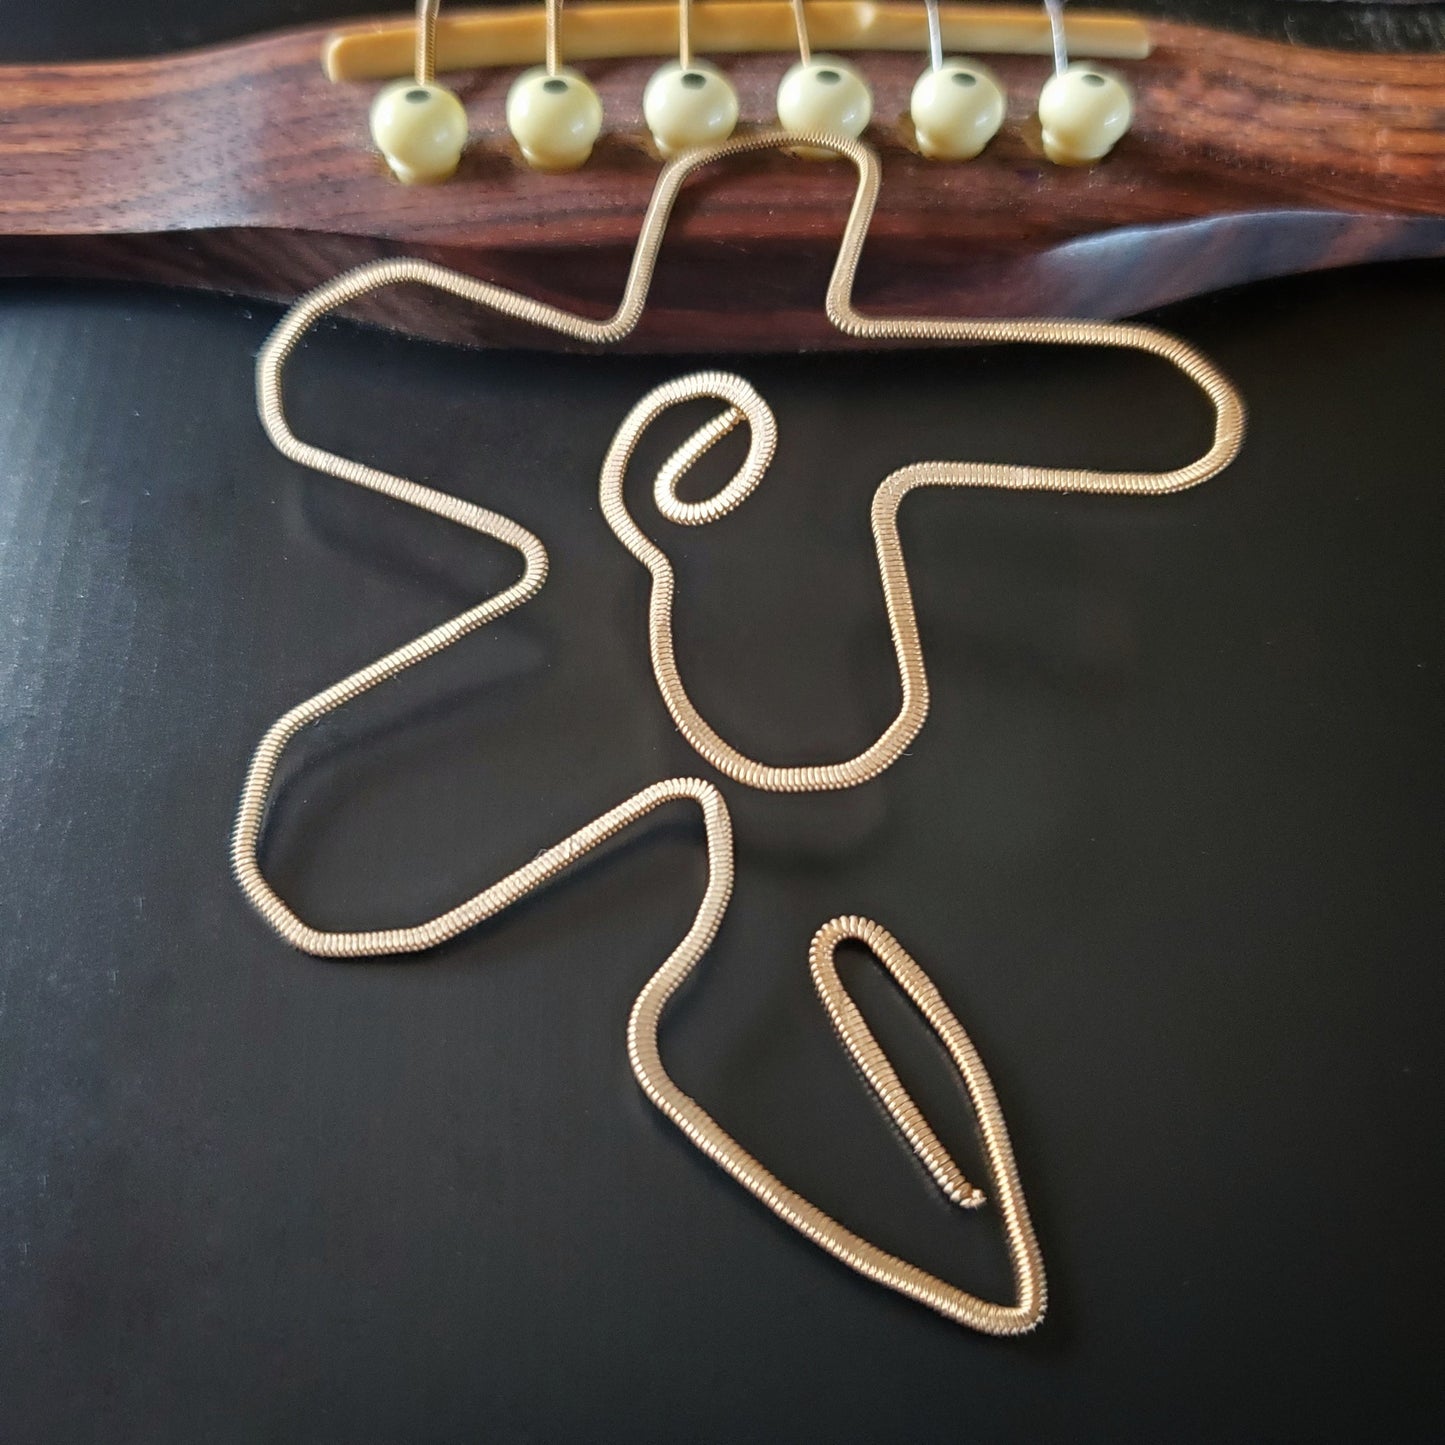 bookmark shaped like a flower made from a hammered guitar string lying partway on the bridge of a black guitar